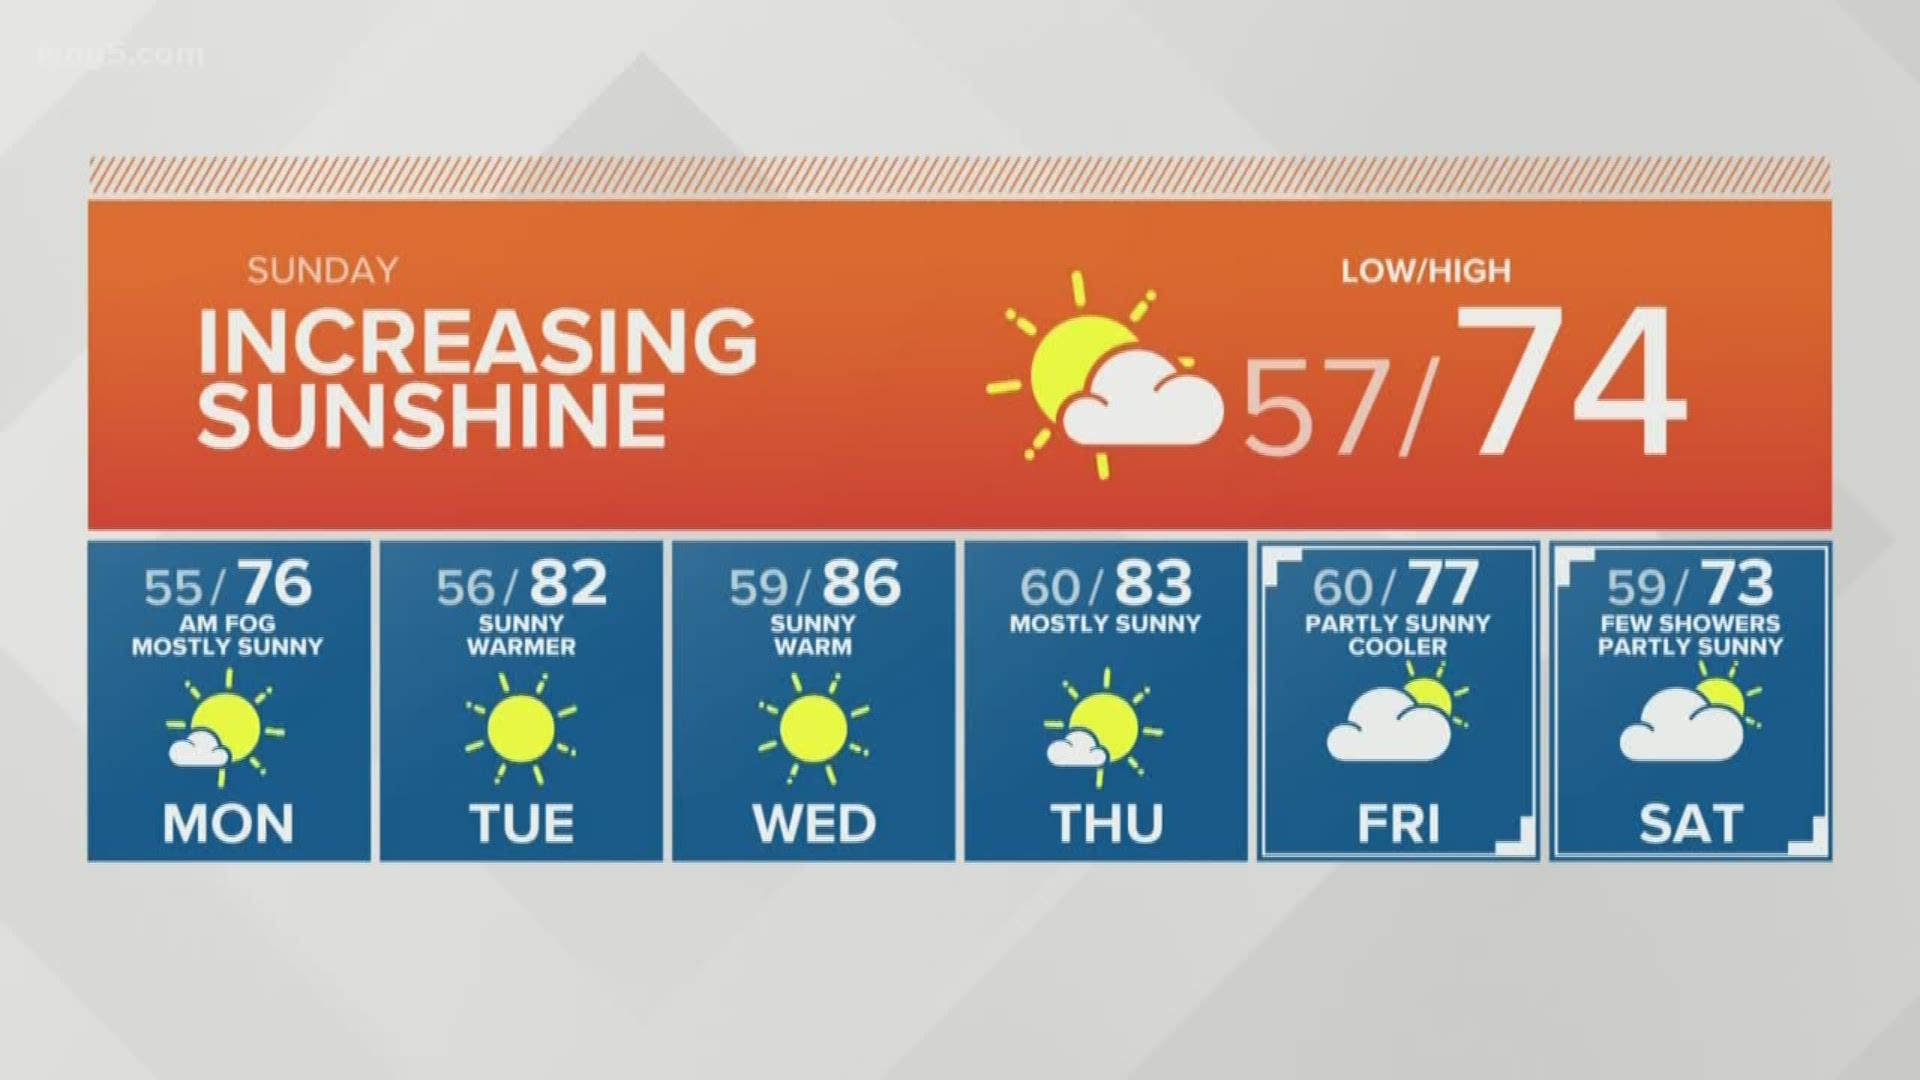 August 25, 2019 morning forecast with KING 5 meteorologist Ben Dery